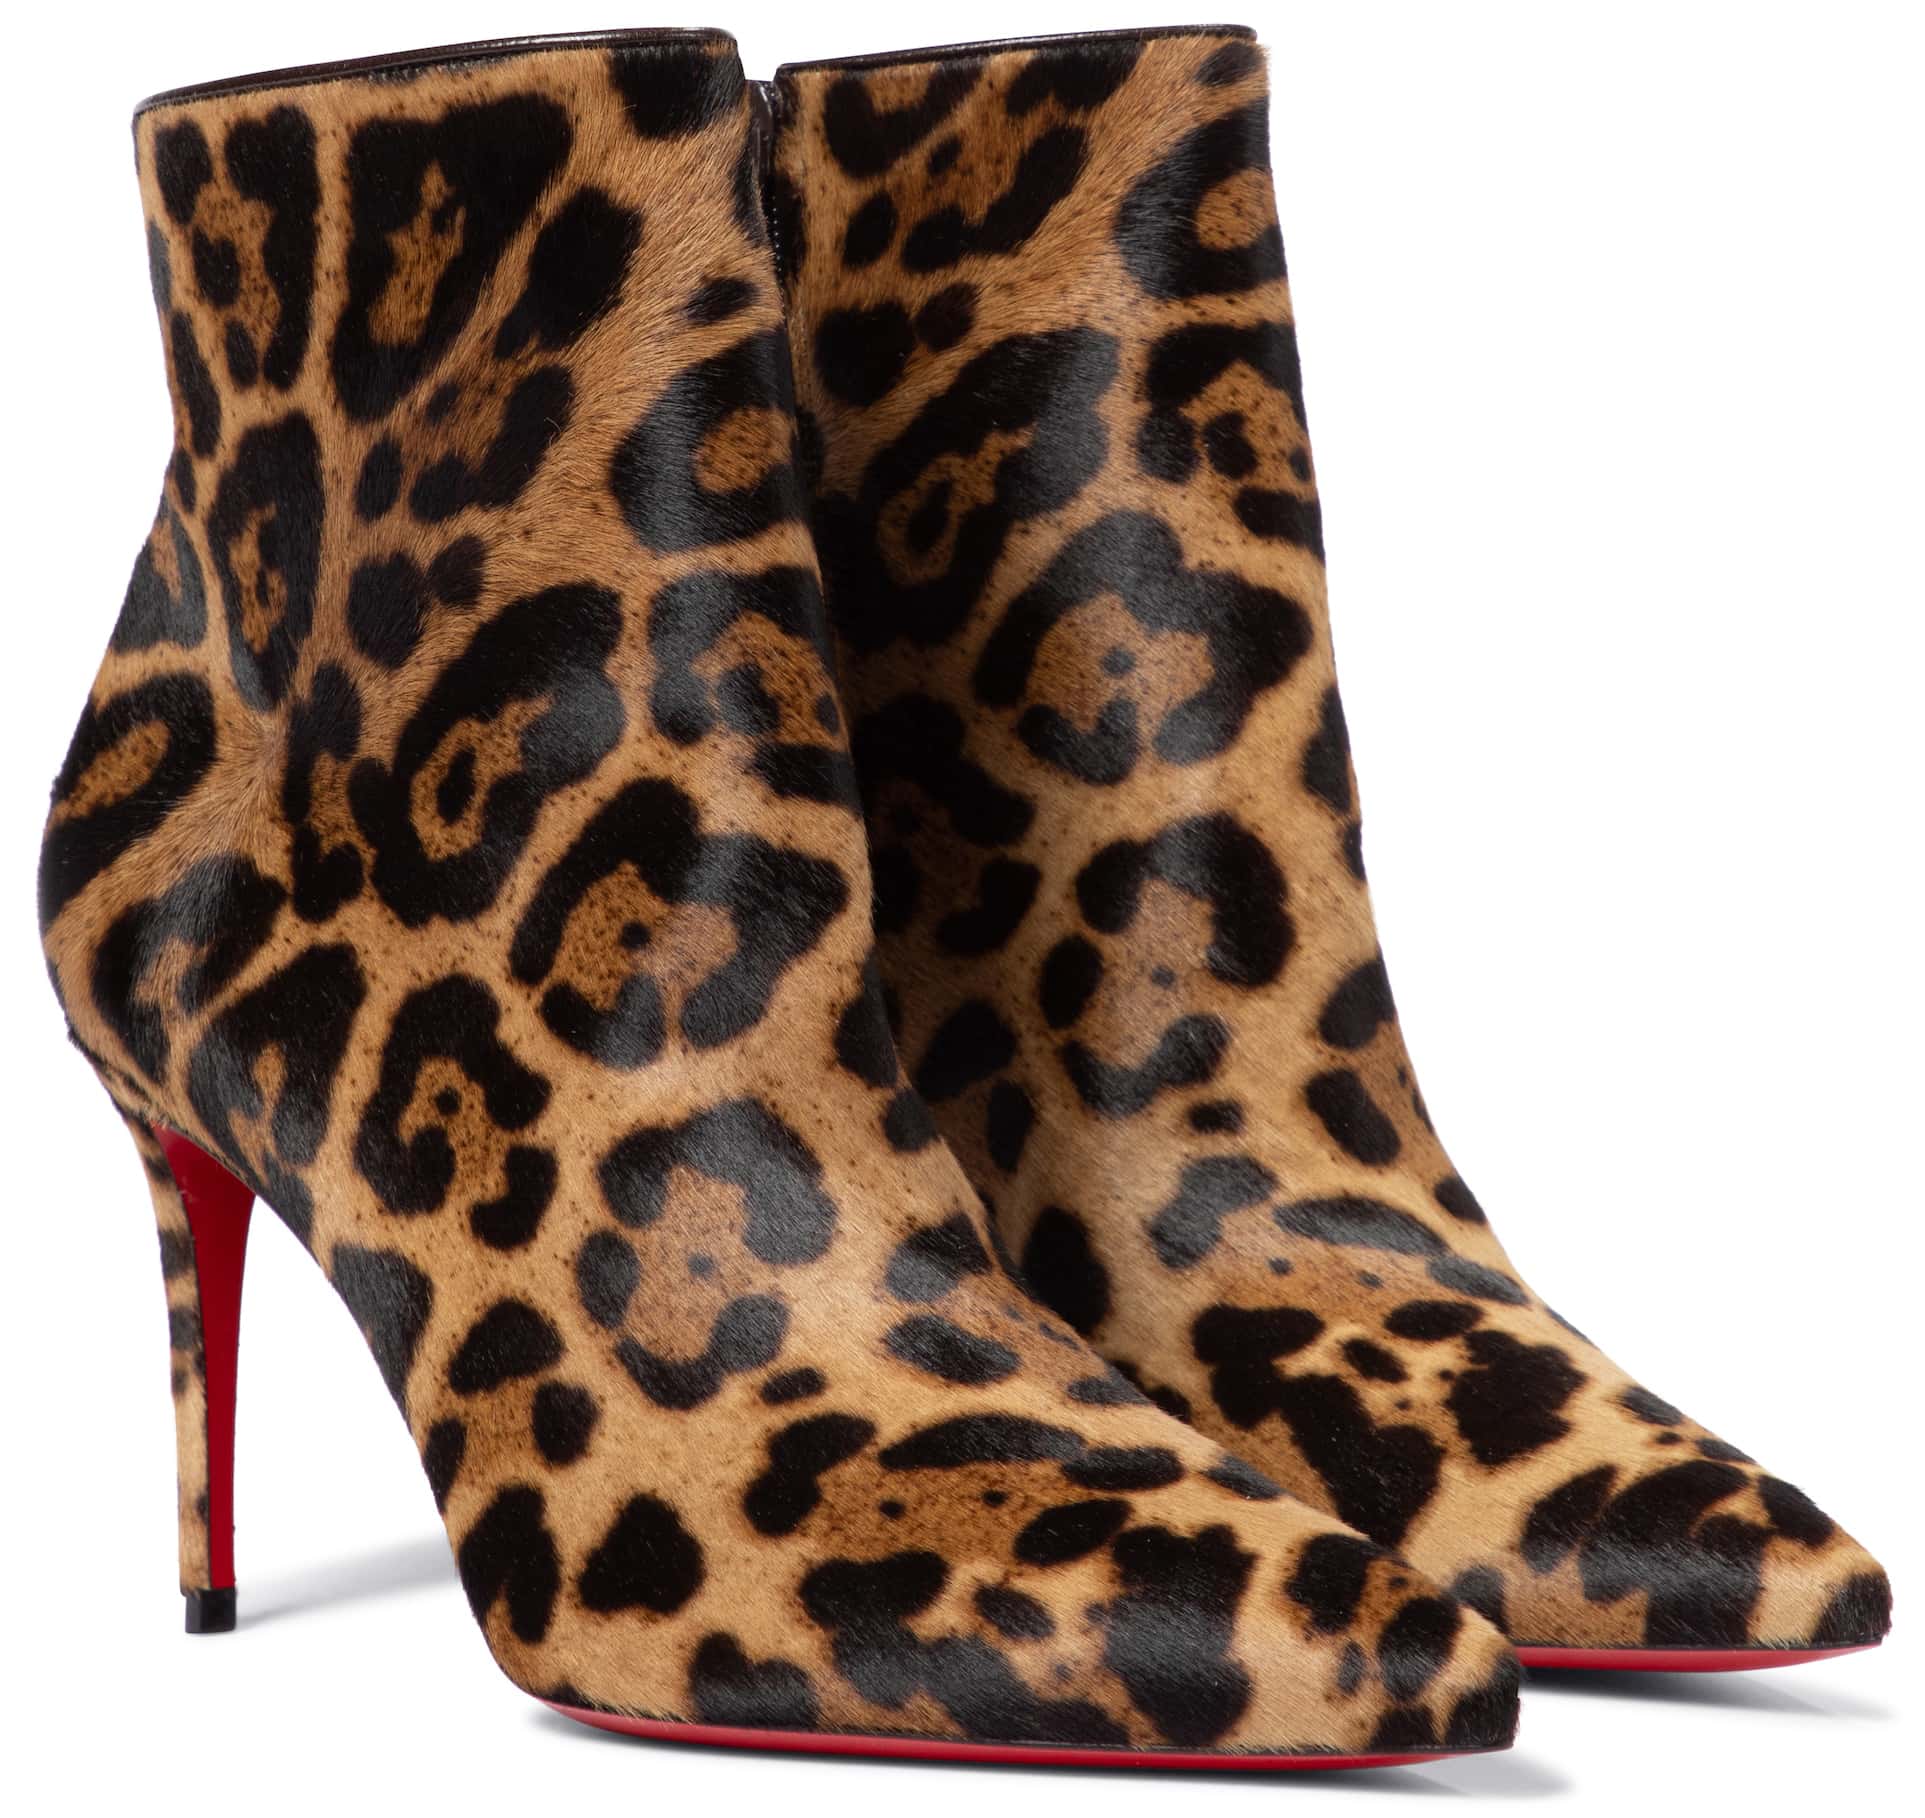 Crafted in Italy from smooth calf hair, the So Kate booties are updated in a bold leopard print